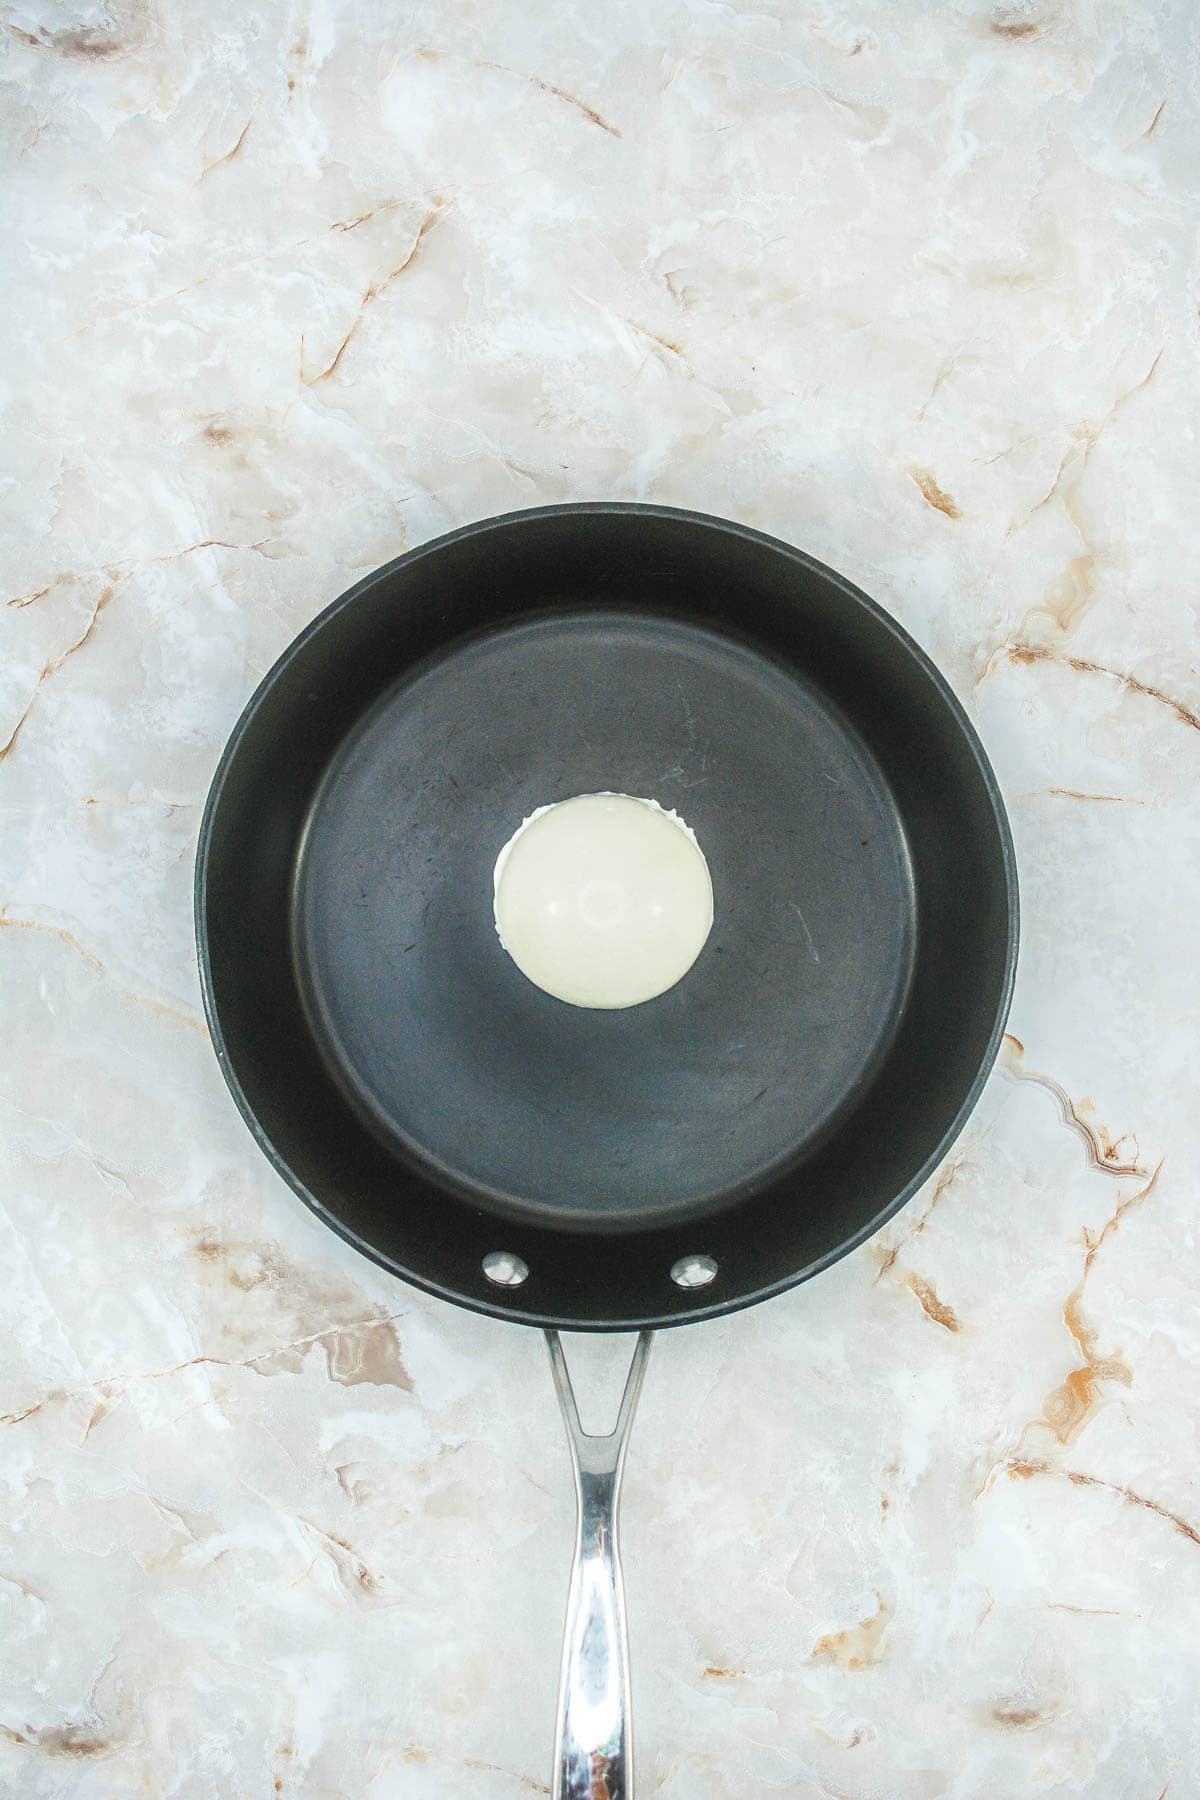 A half sphere of white chocolate upside down in a frying pan.